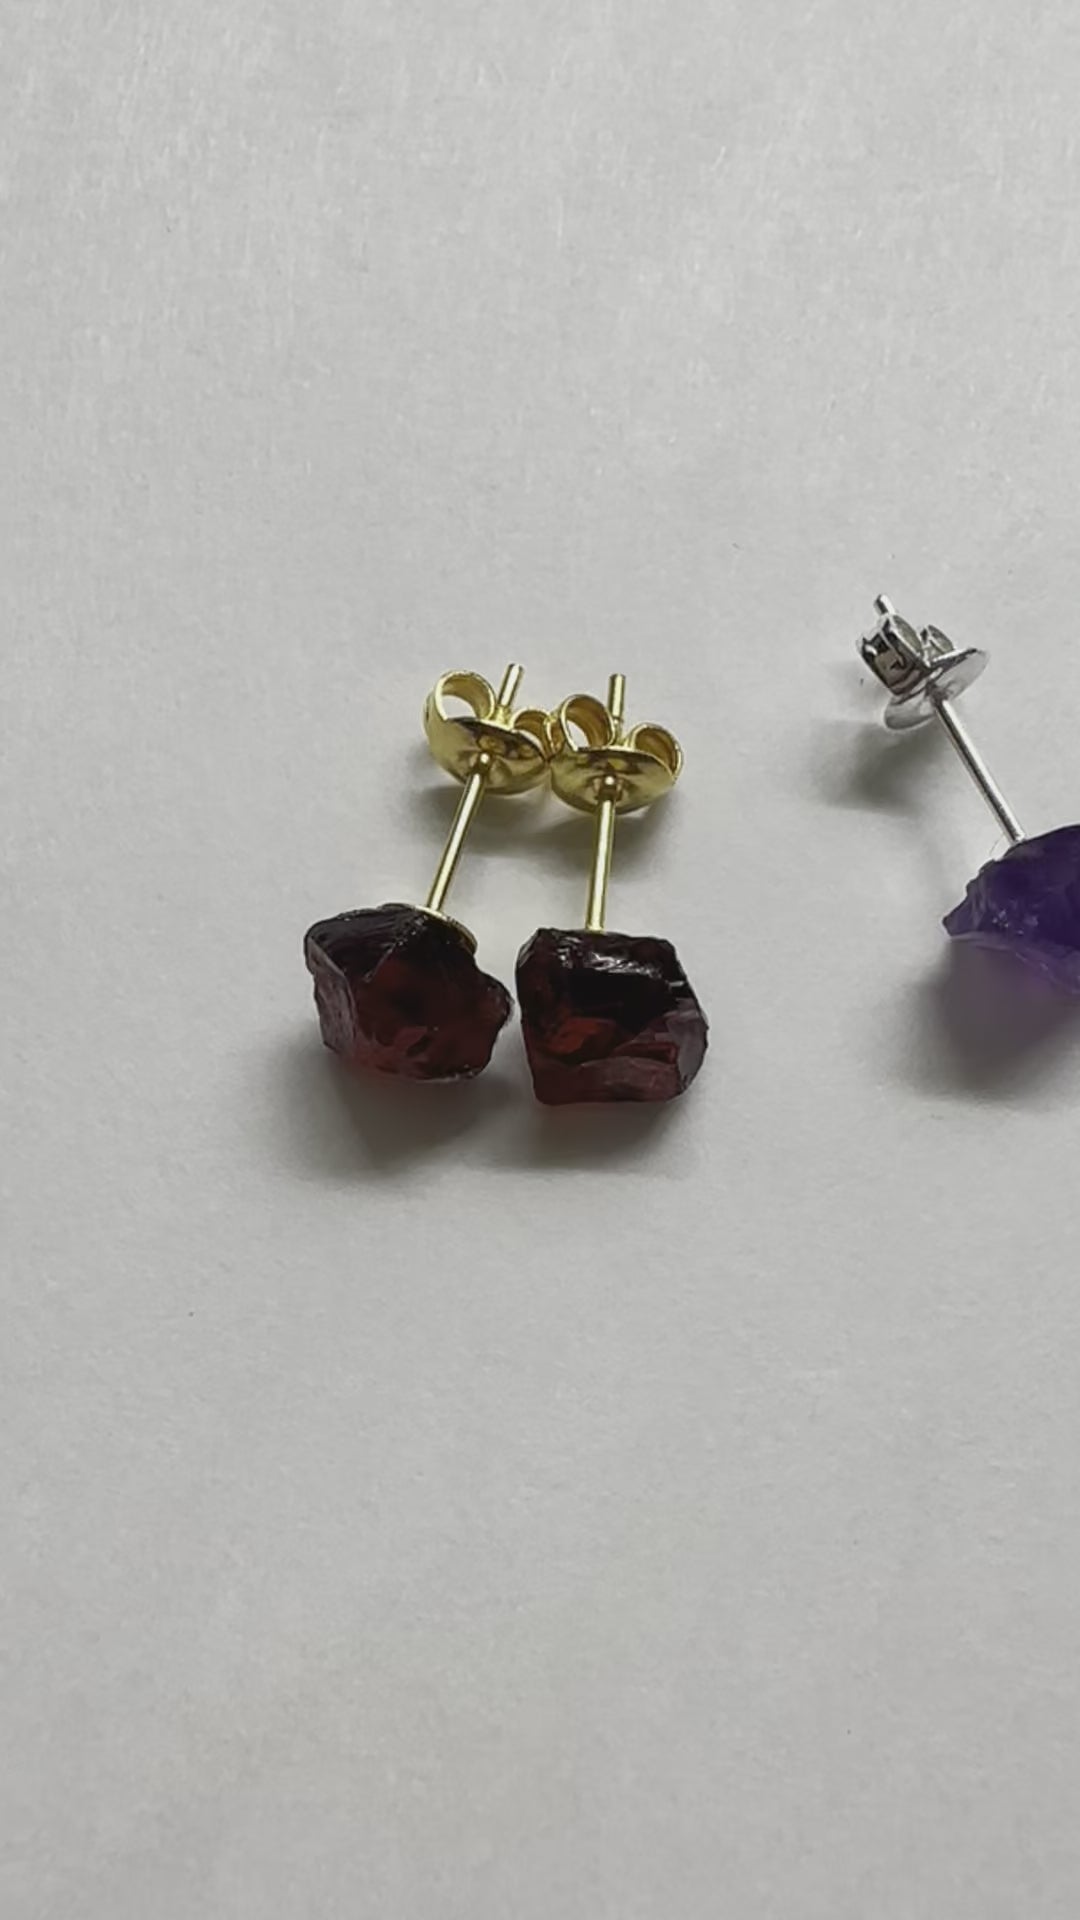 A real-time video showing all of the raw gemstone birthstone stud earrings.